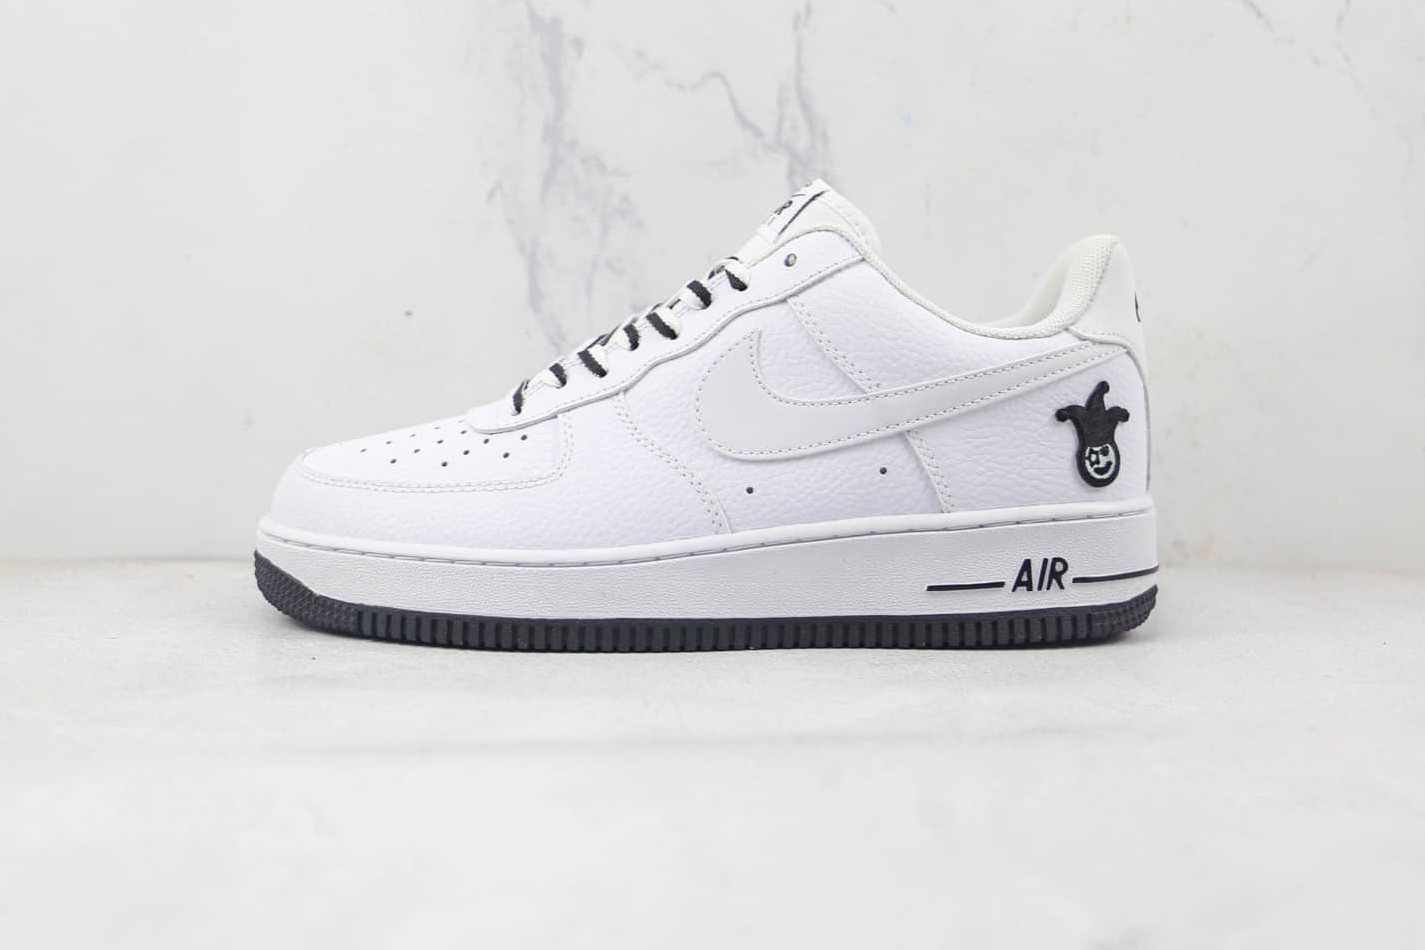 Nike Air Force 1 07 Low White Blue Crystal Black KH0806-168 - Stylish and Versatile Sneakers